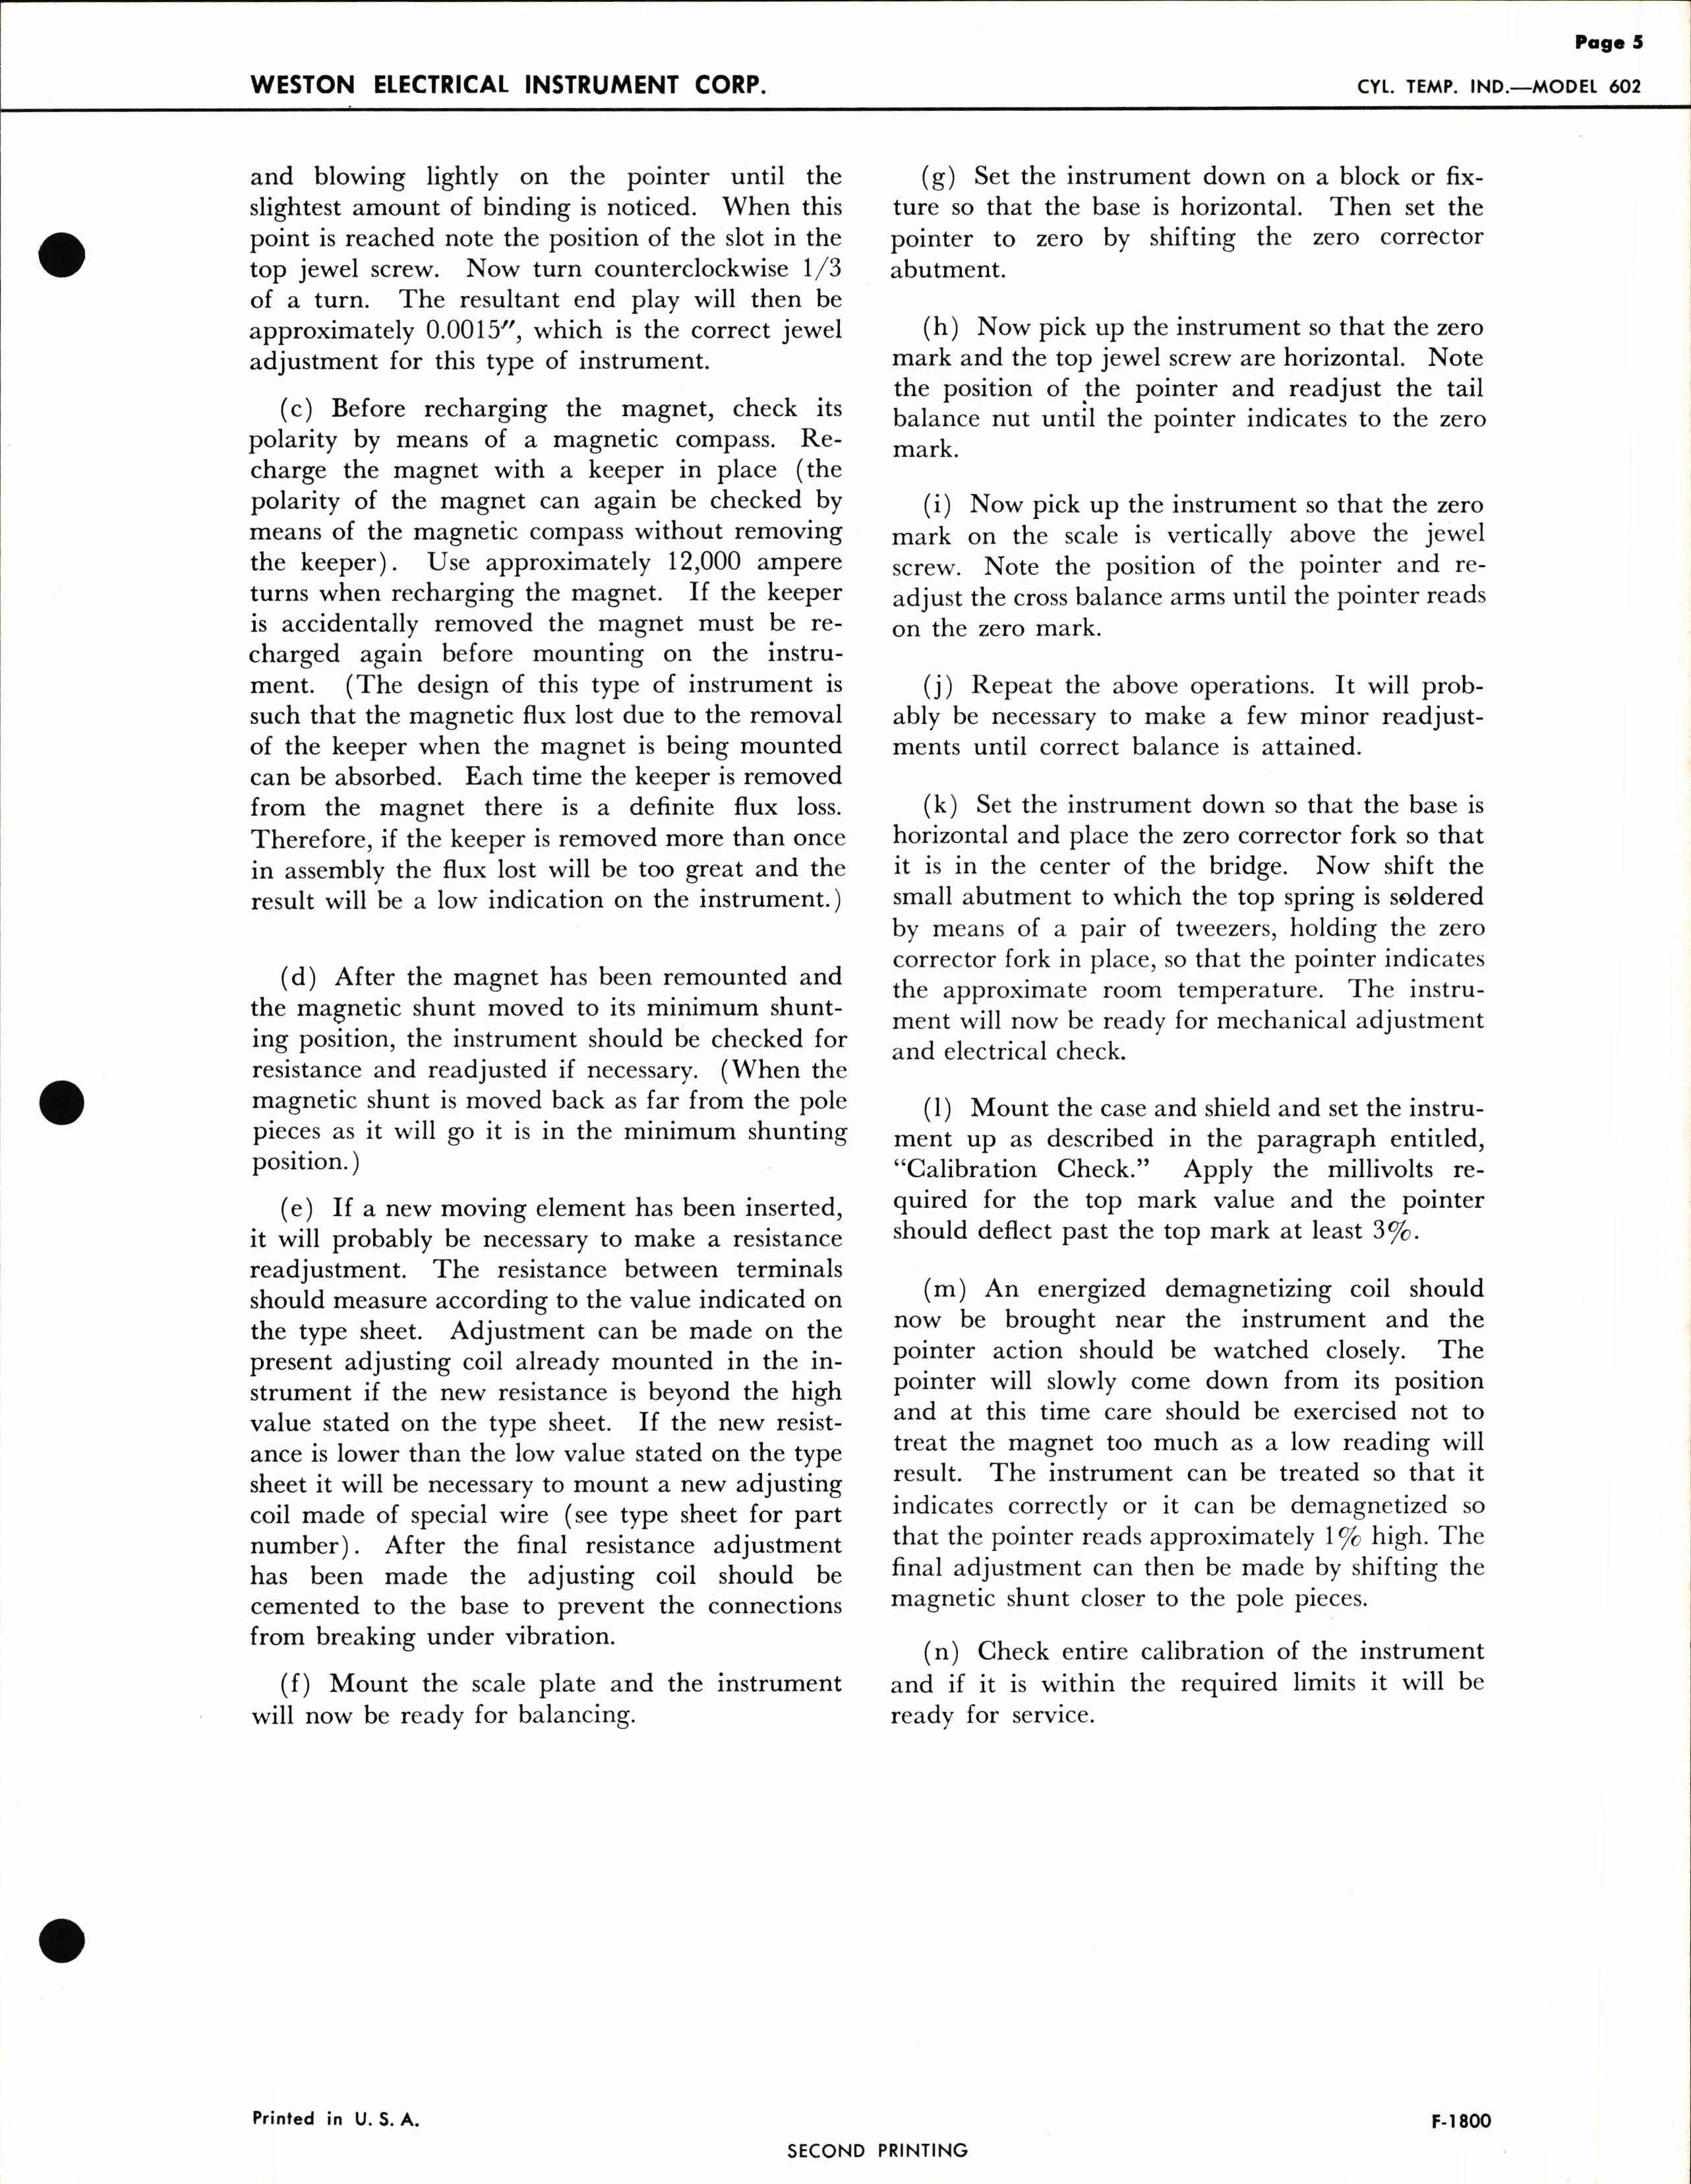 Sample page 5 from AirCorps Library document: Service Instructions for Model 602 Cylinder Temperature Indicators